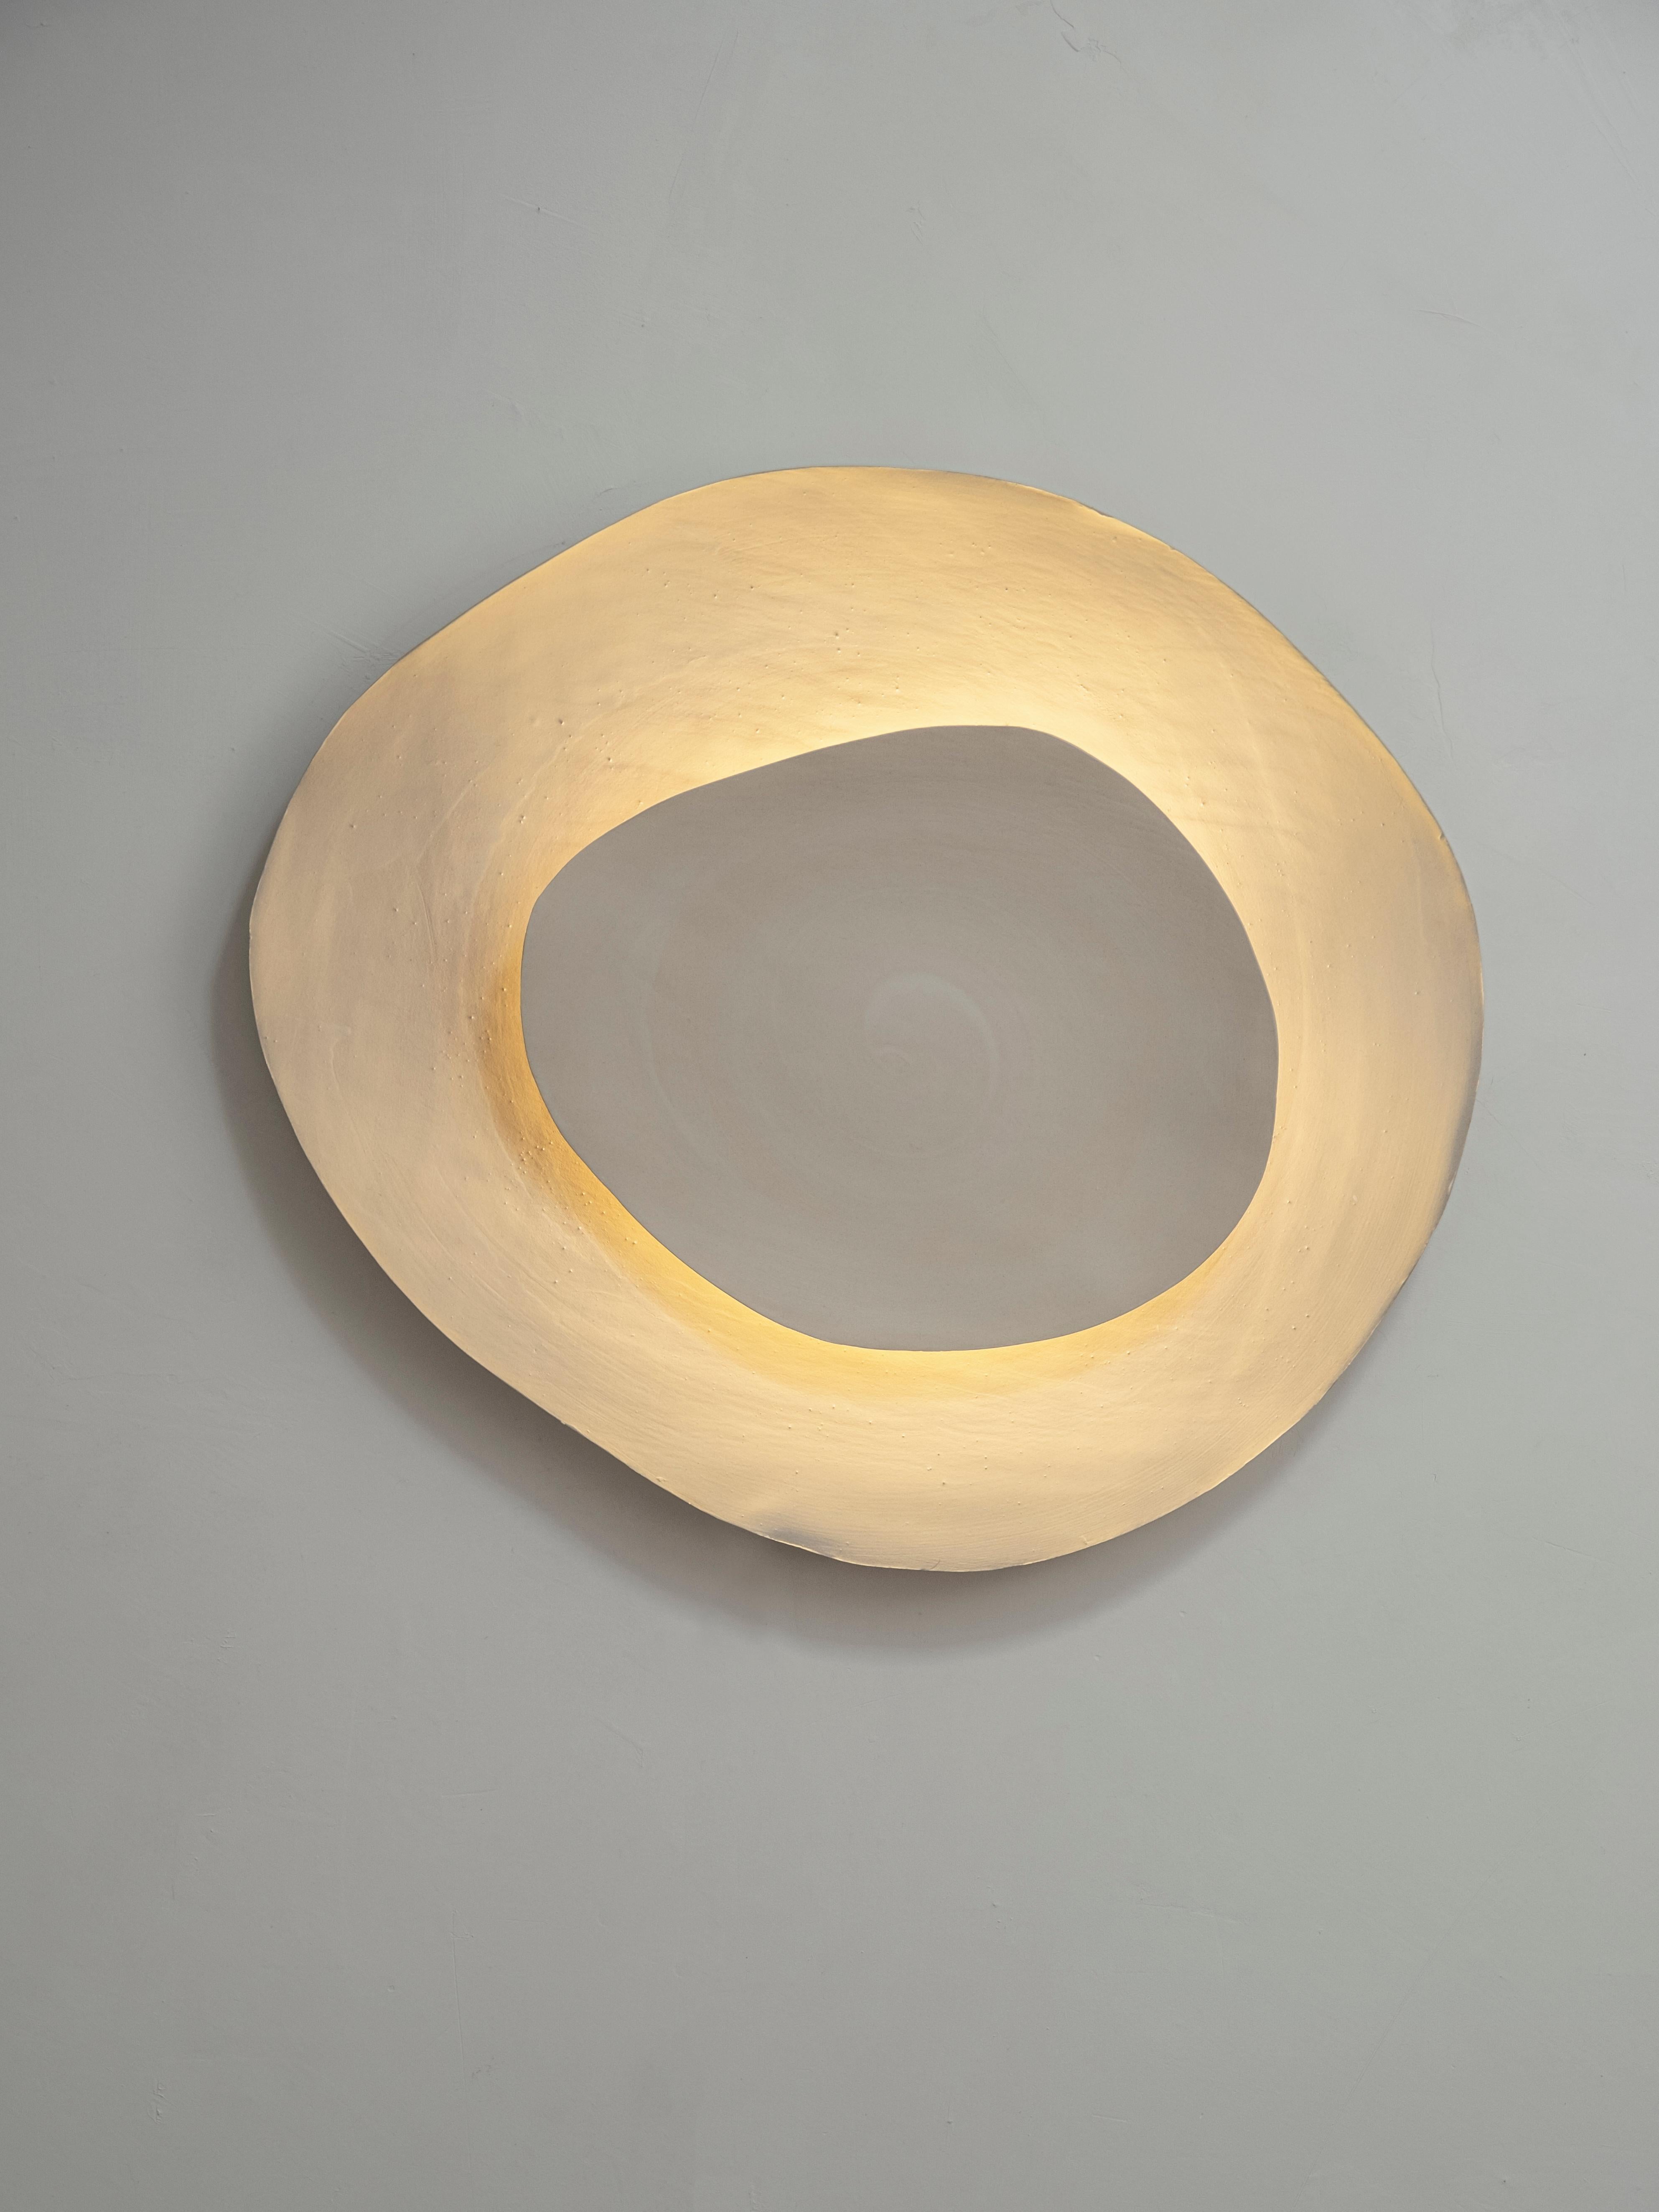 Silk #12 wall light by Margaux Leycuras
One of a Kind, Signed and numbered.
Dimensions: Ø51, H58 cm.
Material: Ceramic, sandy stoneware platters with a porcelain slip finish.
The piece is signed, numbered and delivered with a certificate of